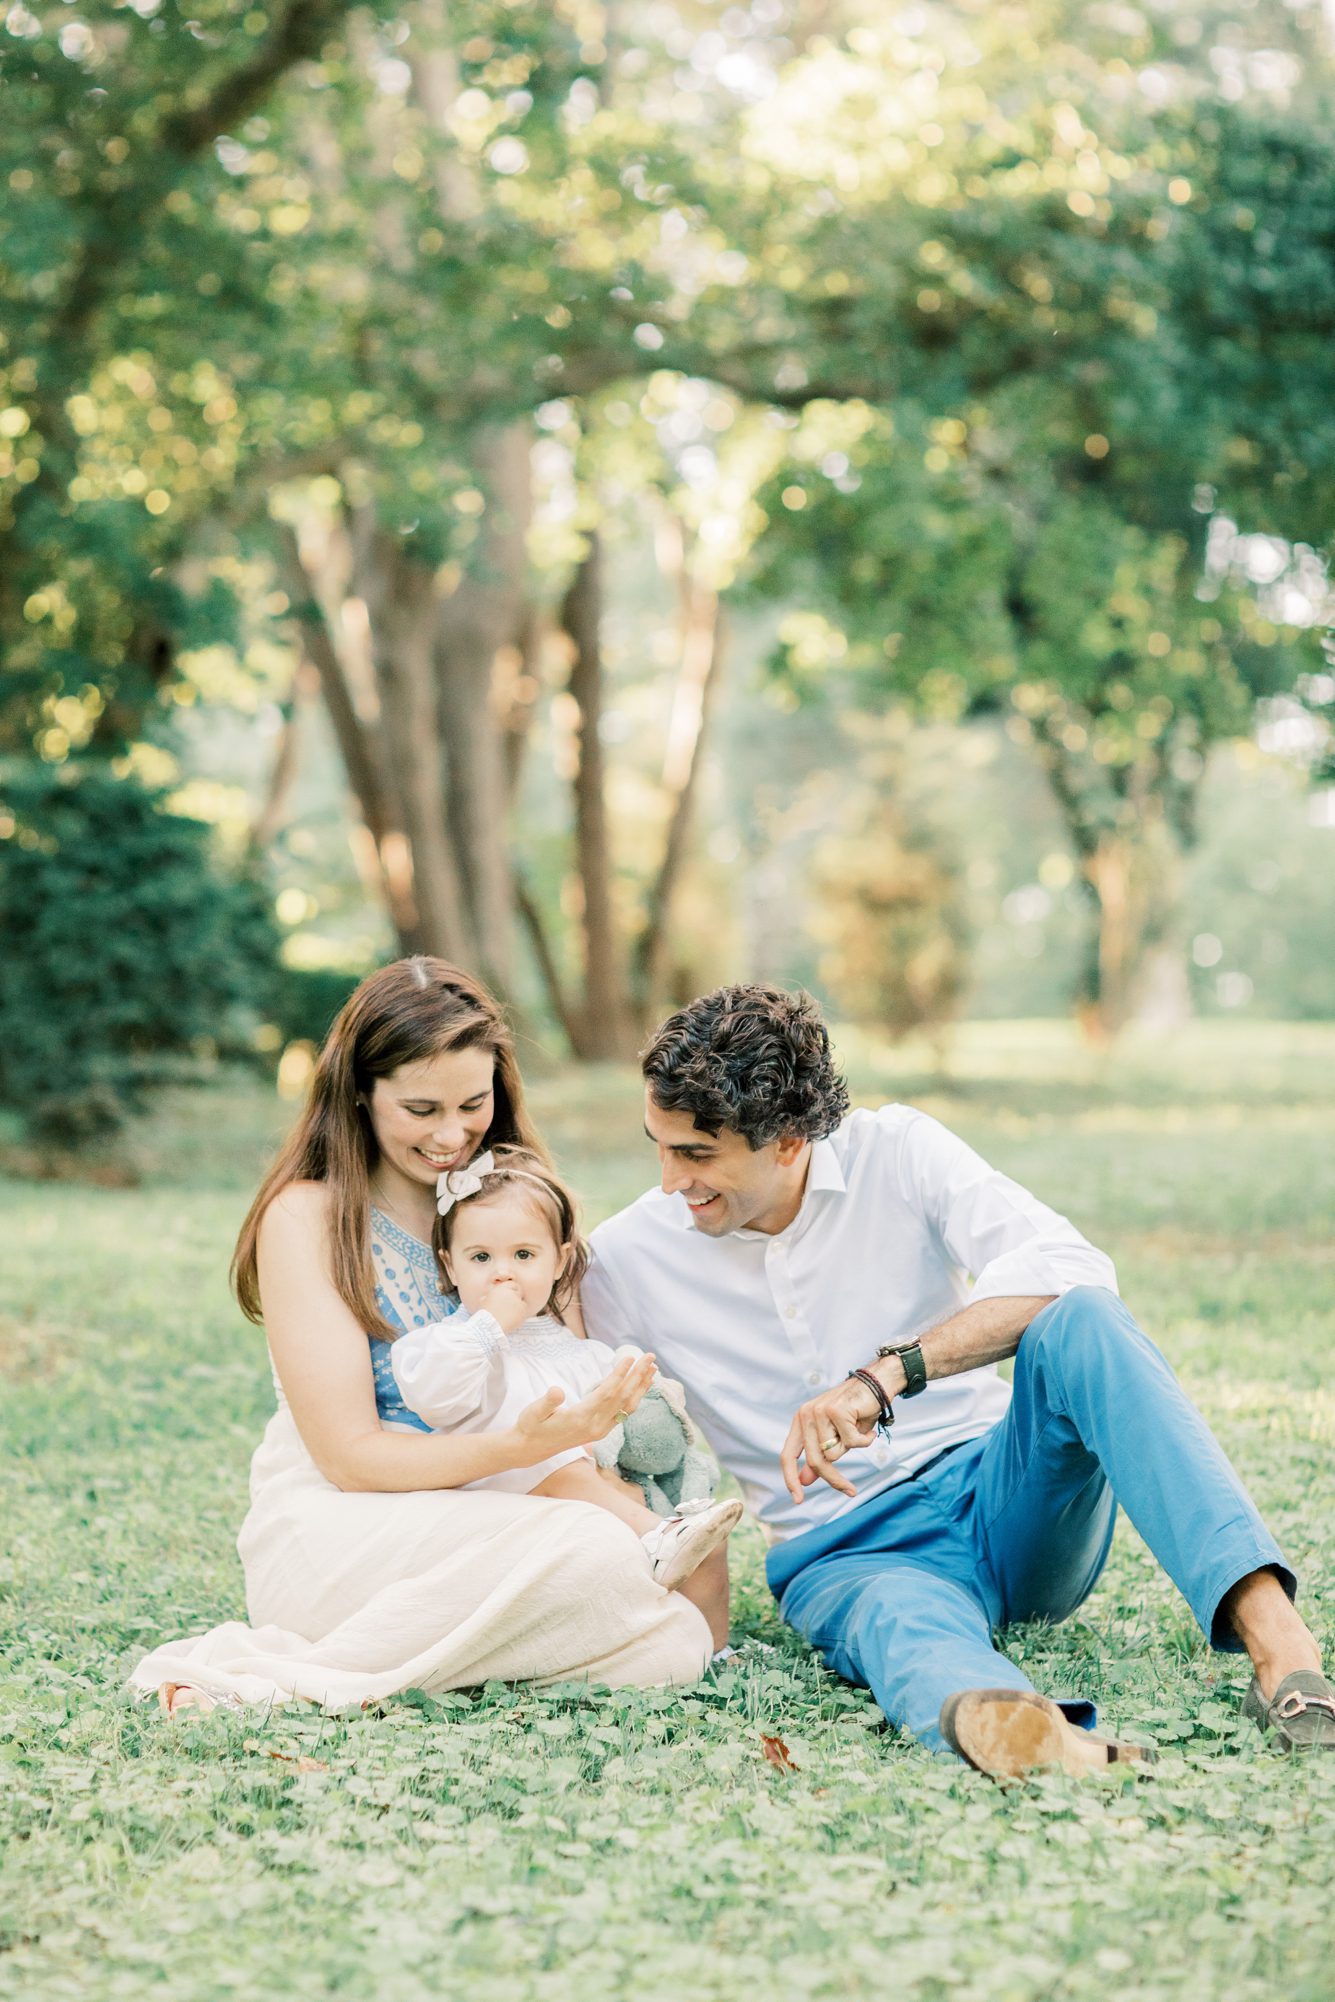 Family cuddling on grass at Woodend Sanctuary and Mansion during family photoshoot. Photo by LRG Portraits.